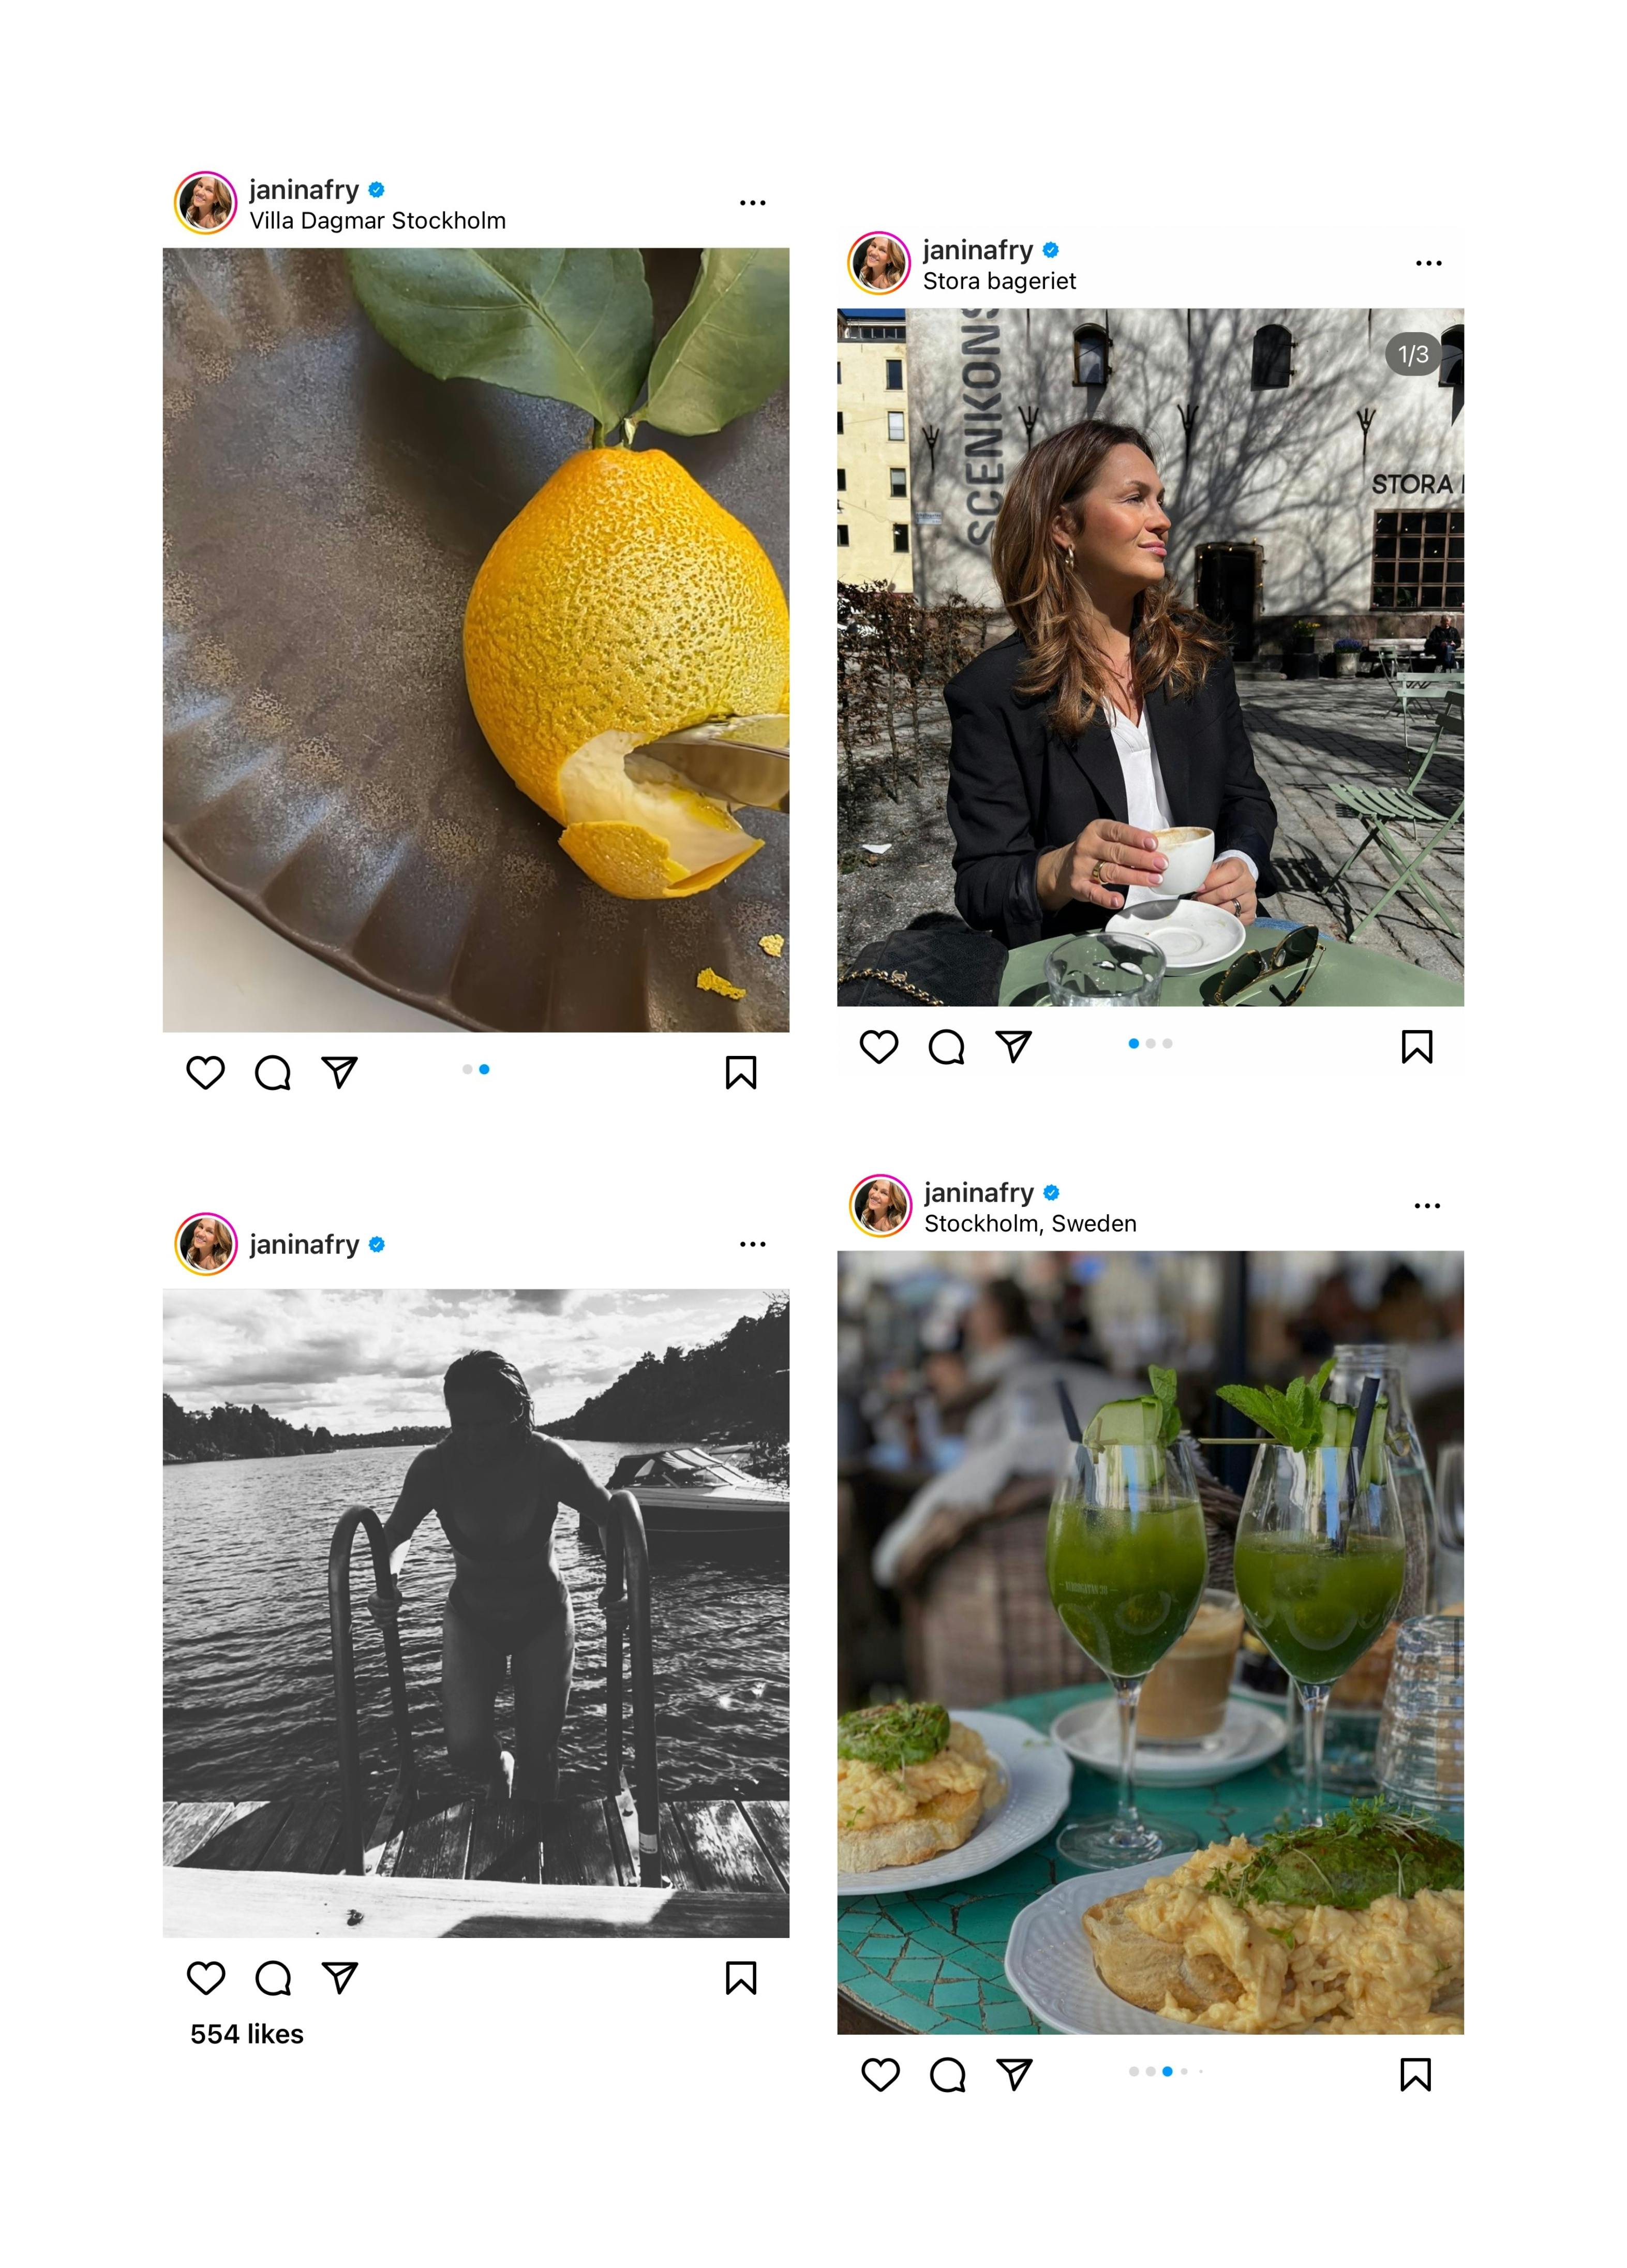 Stockholm guide featuring images from janina fry's instagram